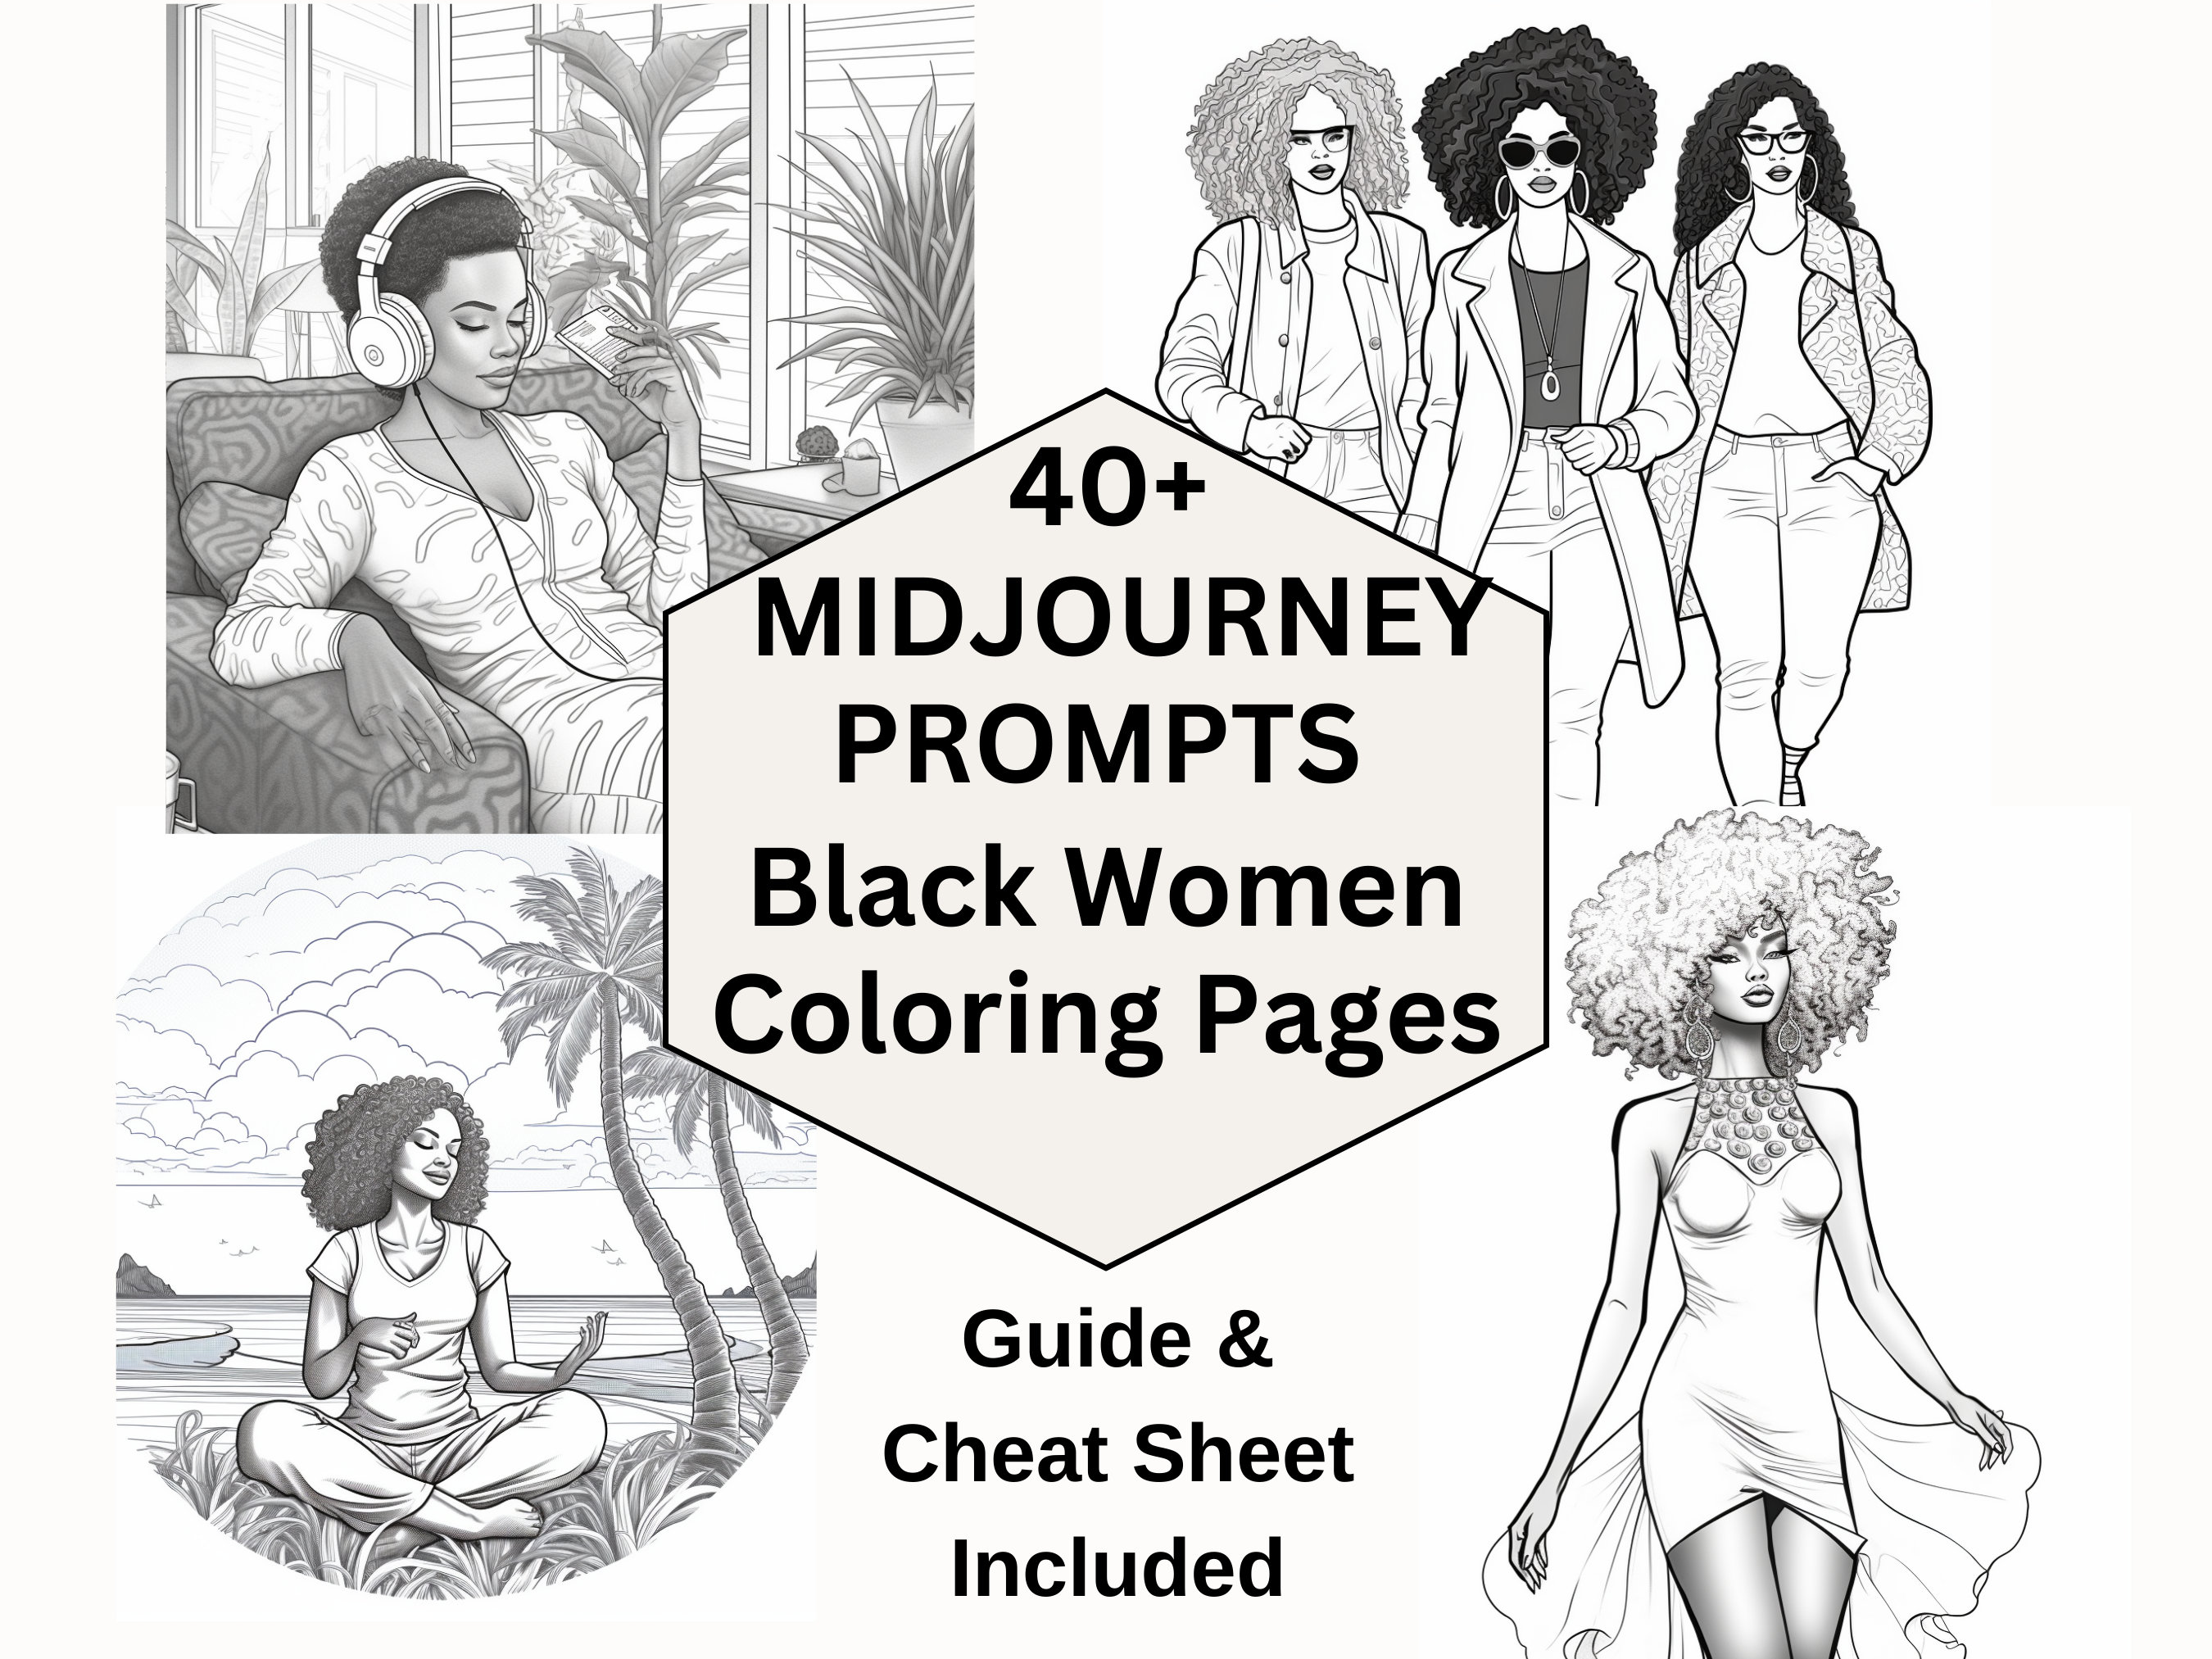 50 Midjourney Prompts For Coloring Book Pages - WGMI Media